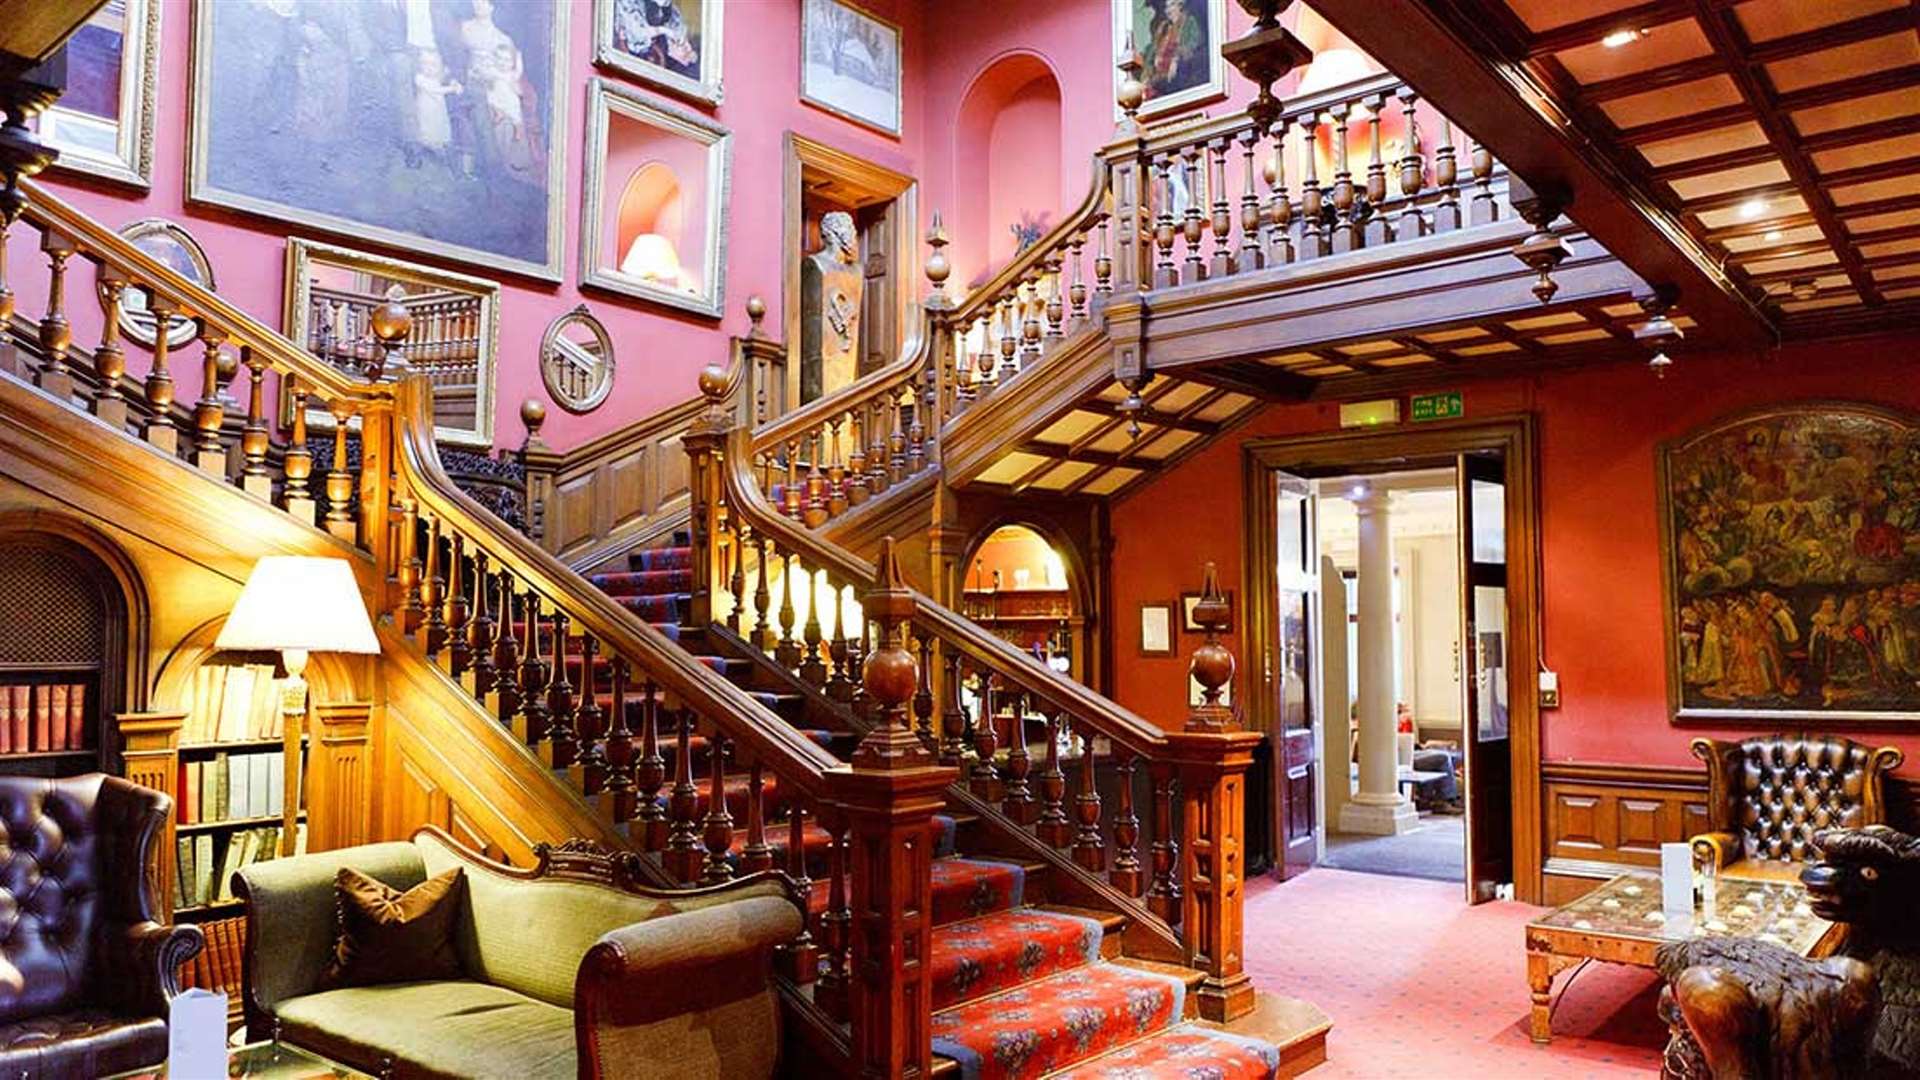 The main staircase showcases all that is beautiful about Chilston Park